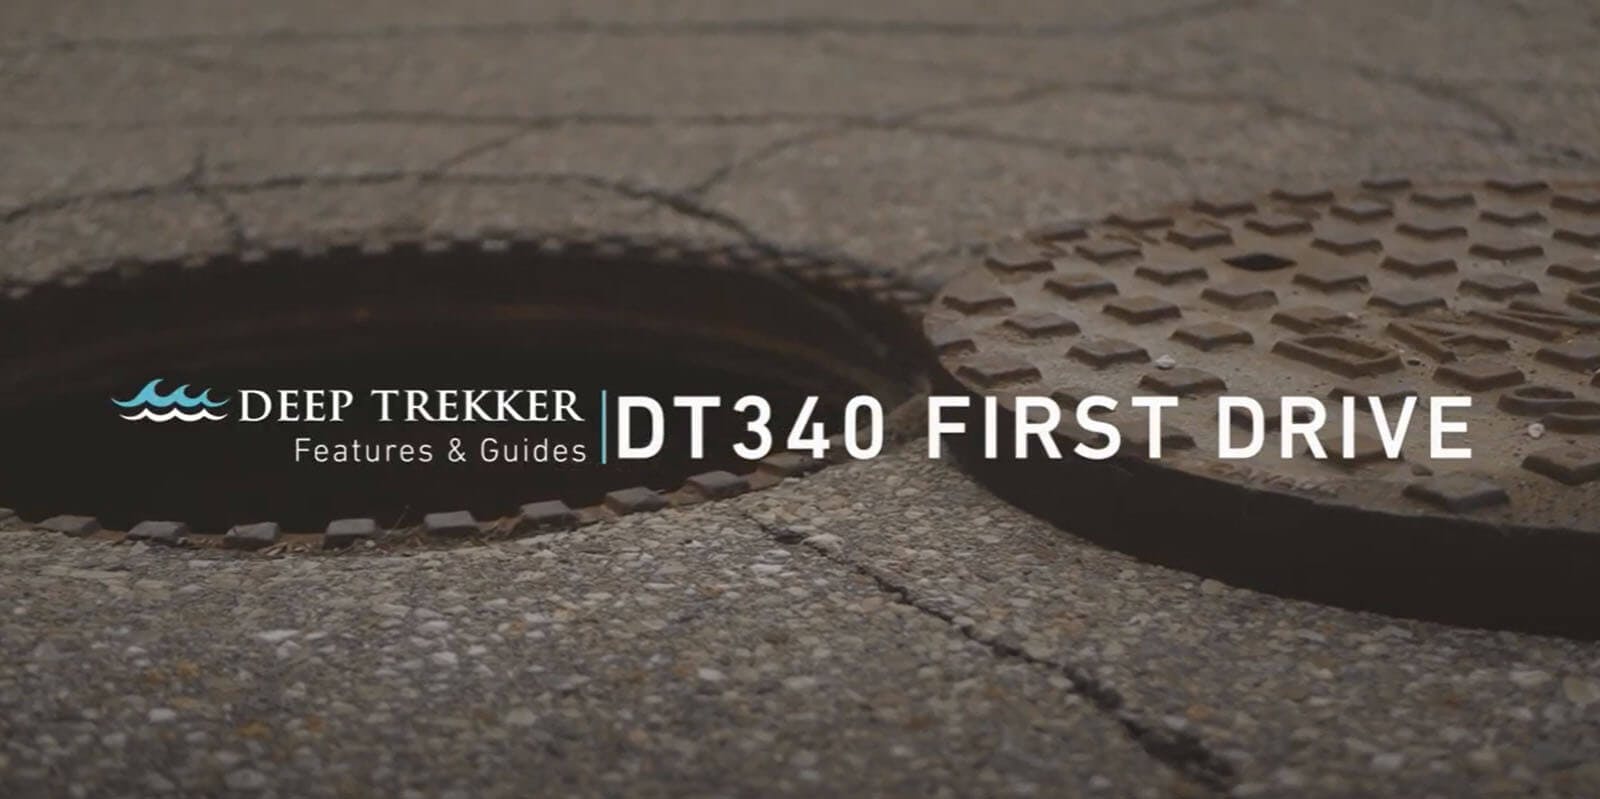 Close up of a manhole in a driveway with the Deep Trekker logo and "DT340 First Drive" written in white.